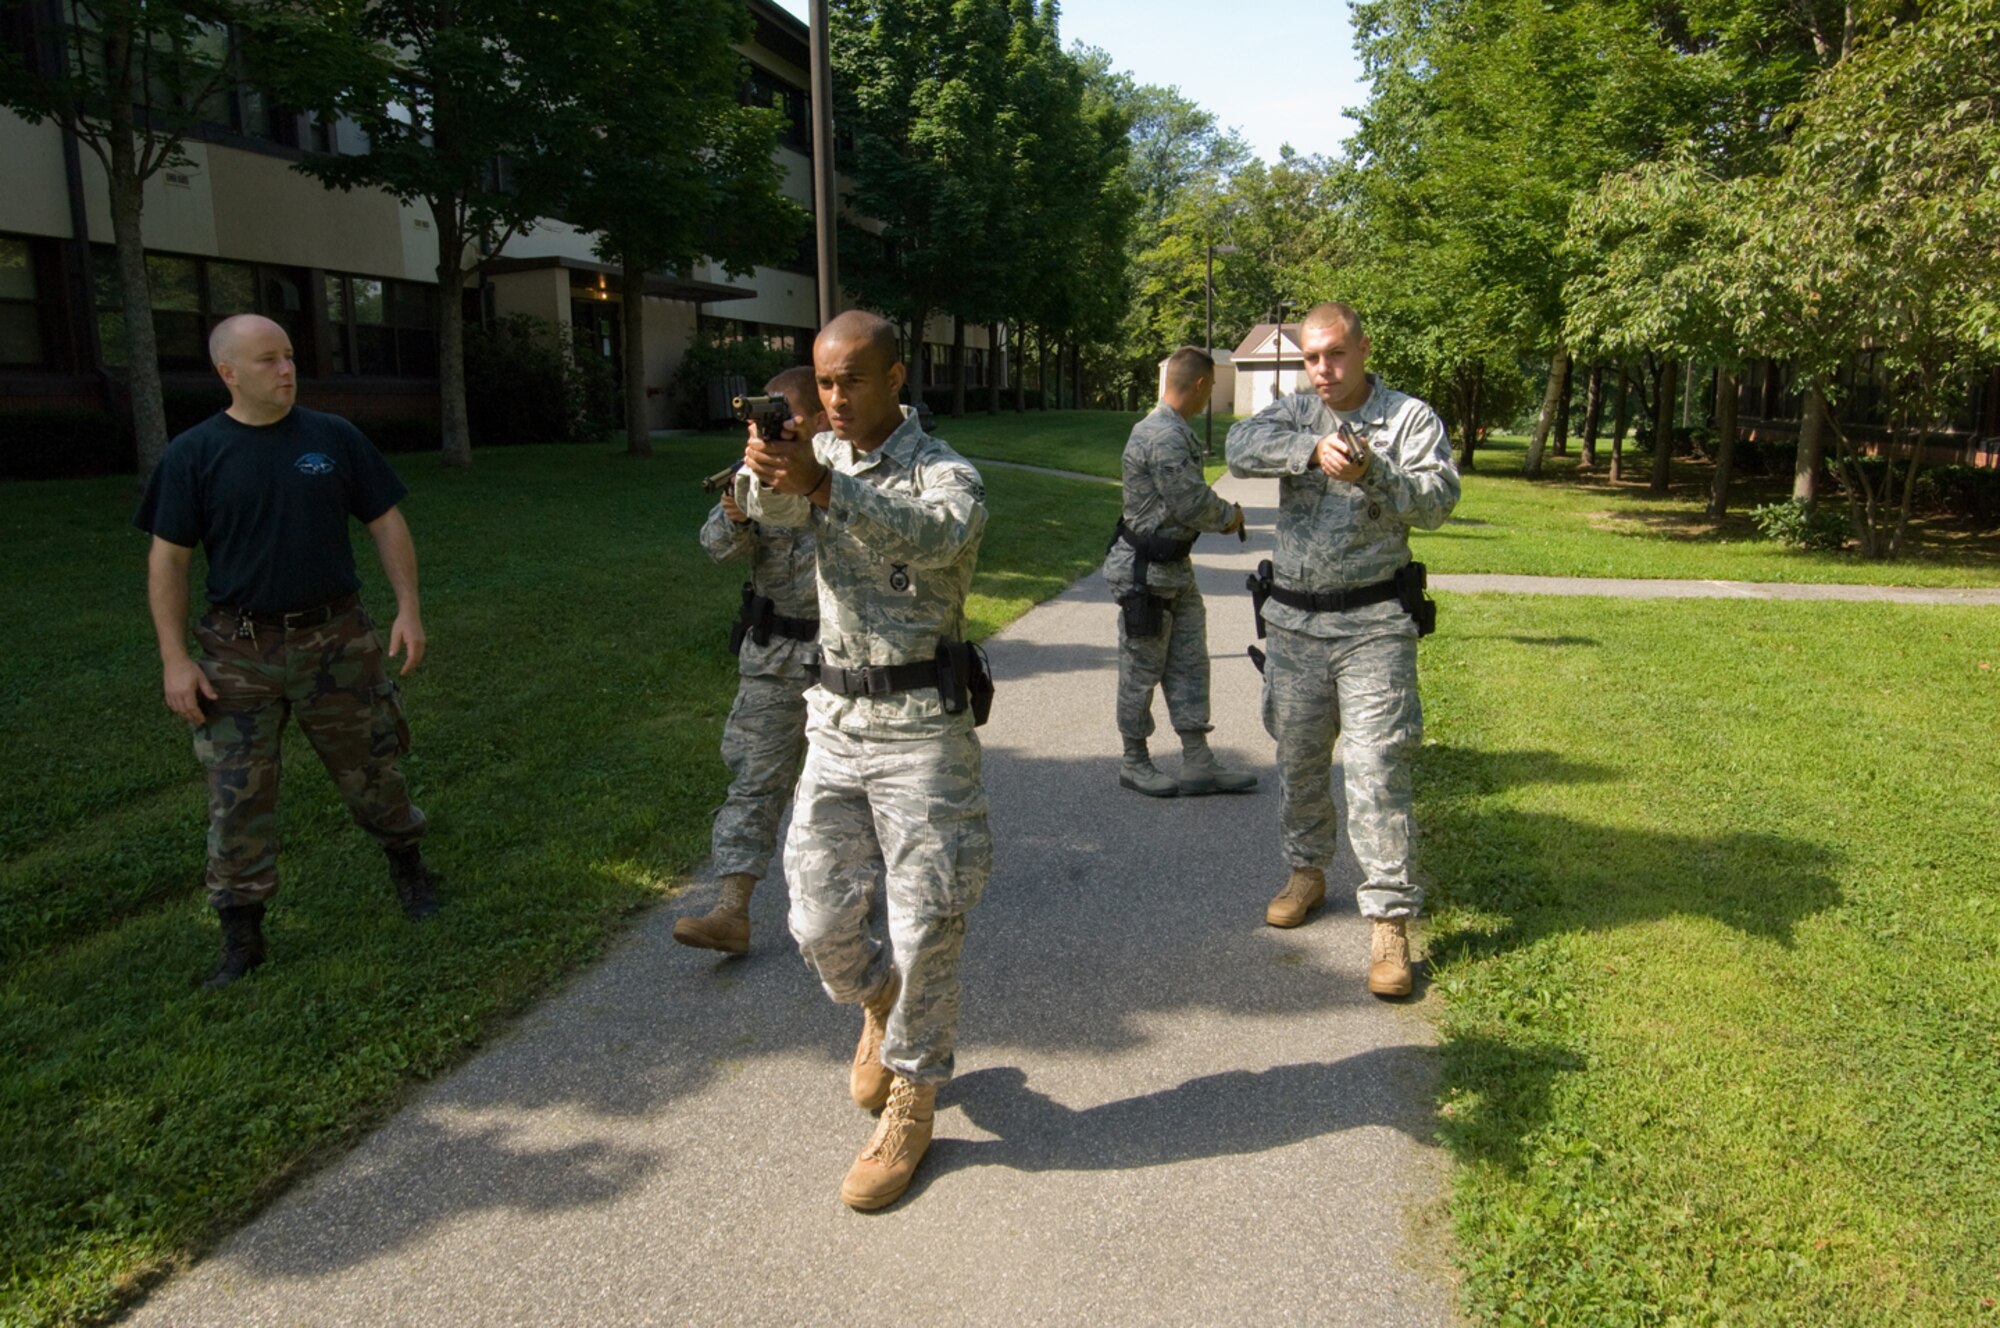 HANSCOM AIR FORCE BASE, Mass. - (From right) Senior Airman John Reed, Airman 1st Class Edwin Torres, Airman 1st Class Ronald Ashley and Senior Airman Mark Cayer, all of the 66th Security Forces Squadron, train with the Massachusetts State Police Special Tactical Operations Team Aug. 6 to learn methods for neutralizing an active shooter, which is a person with a weapon threatening themselves and others within a confined space. Trooper Jim Carmichael (far left), one of the trainers with the Massachusetts State Police Special Tactical Operations Team, educates the Airmen on moving into and within the threat space using a diamond formation, where each member of the four-man team monitors a quarter of the 360-degree view around them. This is the second time the state trooper STOP Team conducted the training for the 66 SFS, which followed the same format as in March, combining classroom sessions with field exercises using Simunition rounds. (U.S. Air Force photo by Rick Berry)